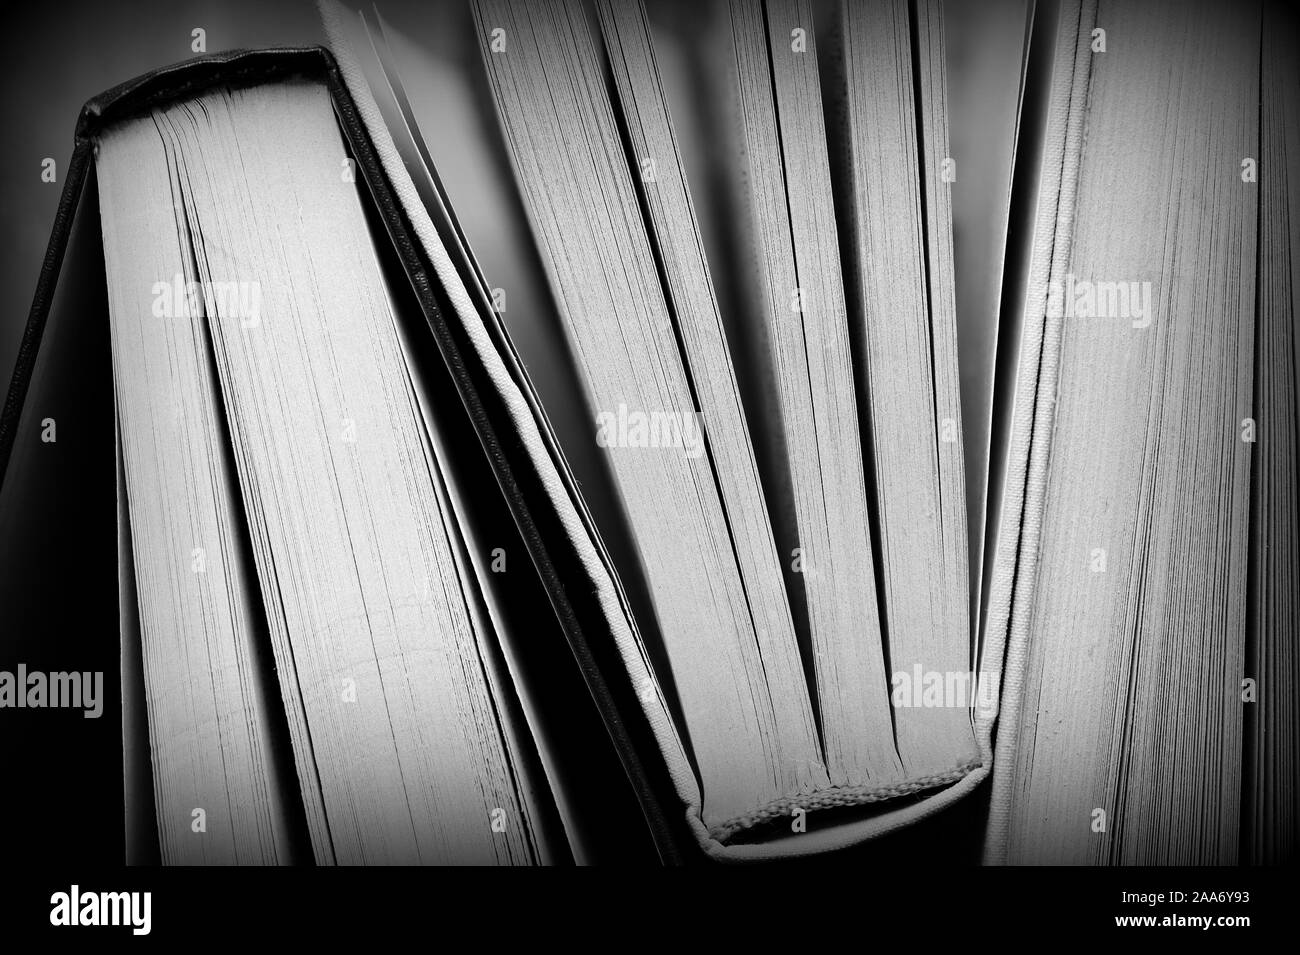 Several old books close up. Monochrome educational background Stock Photo